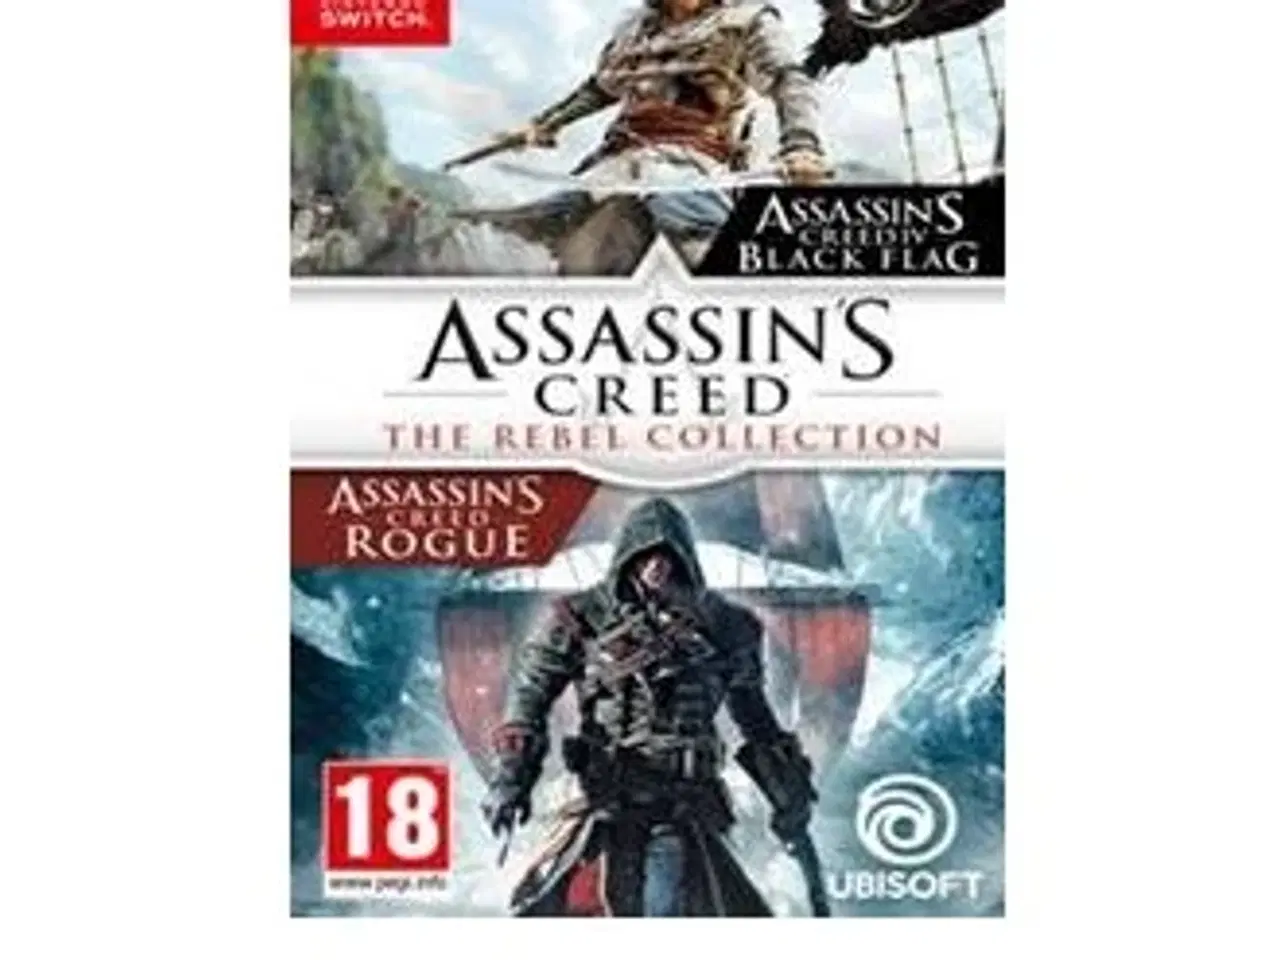 Billede 1 - Assassin's Creed: The Rebel Collection